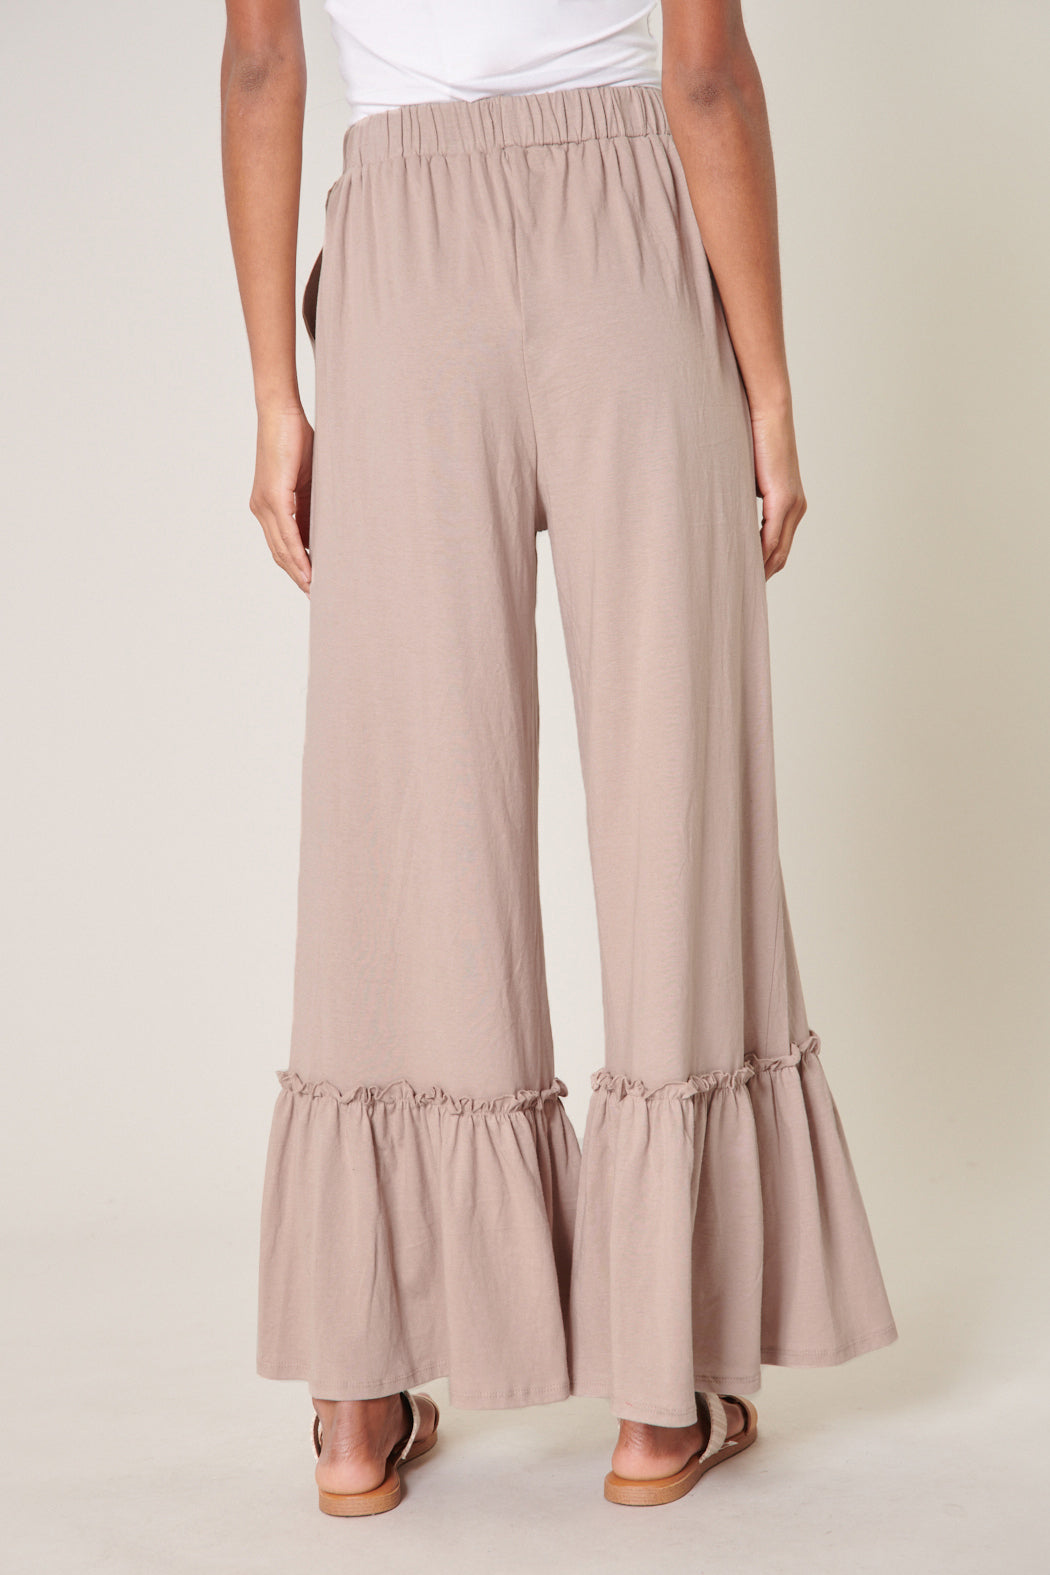 strachable cotton trouser pent with ruffle lace